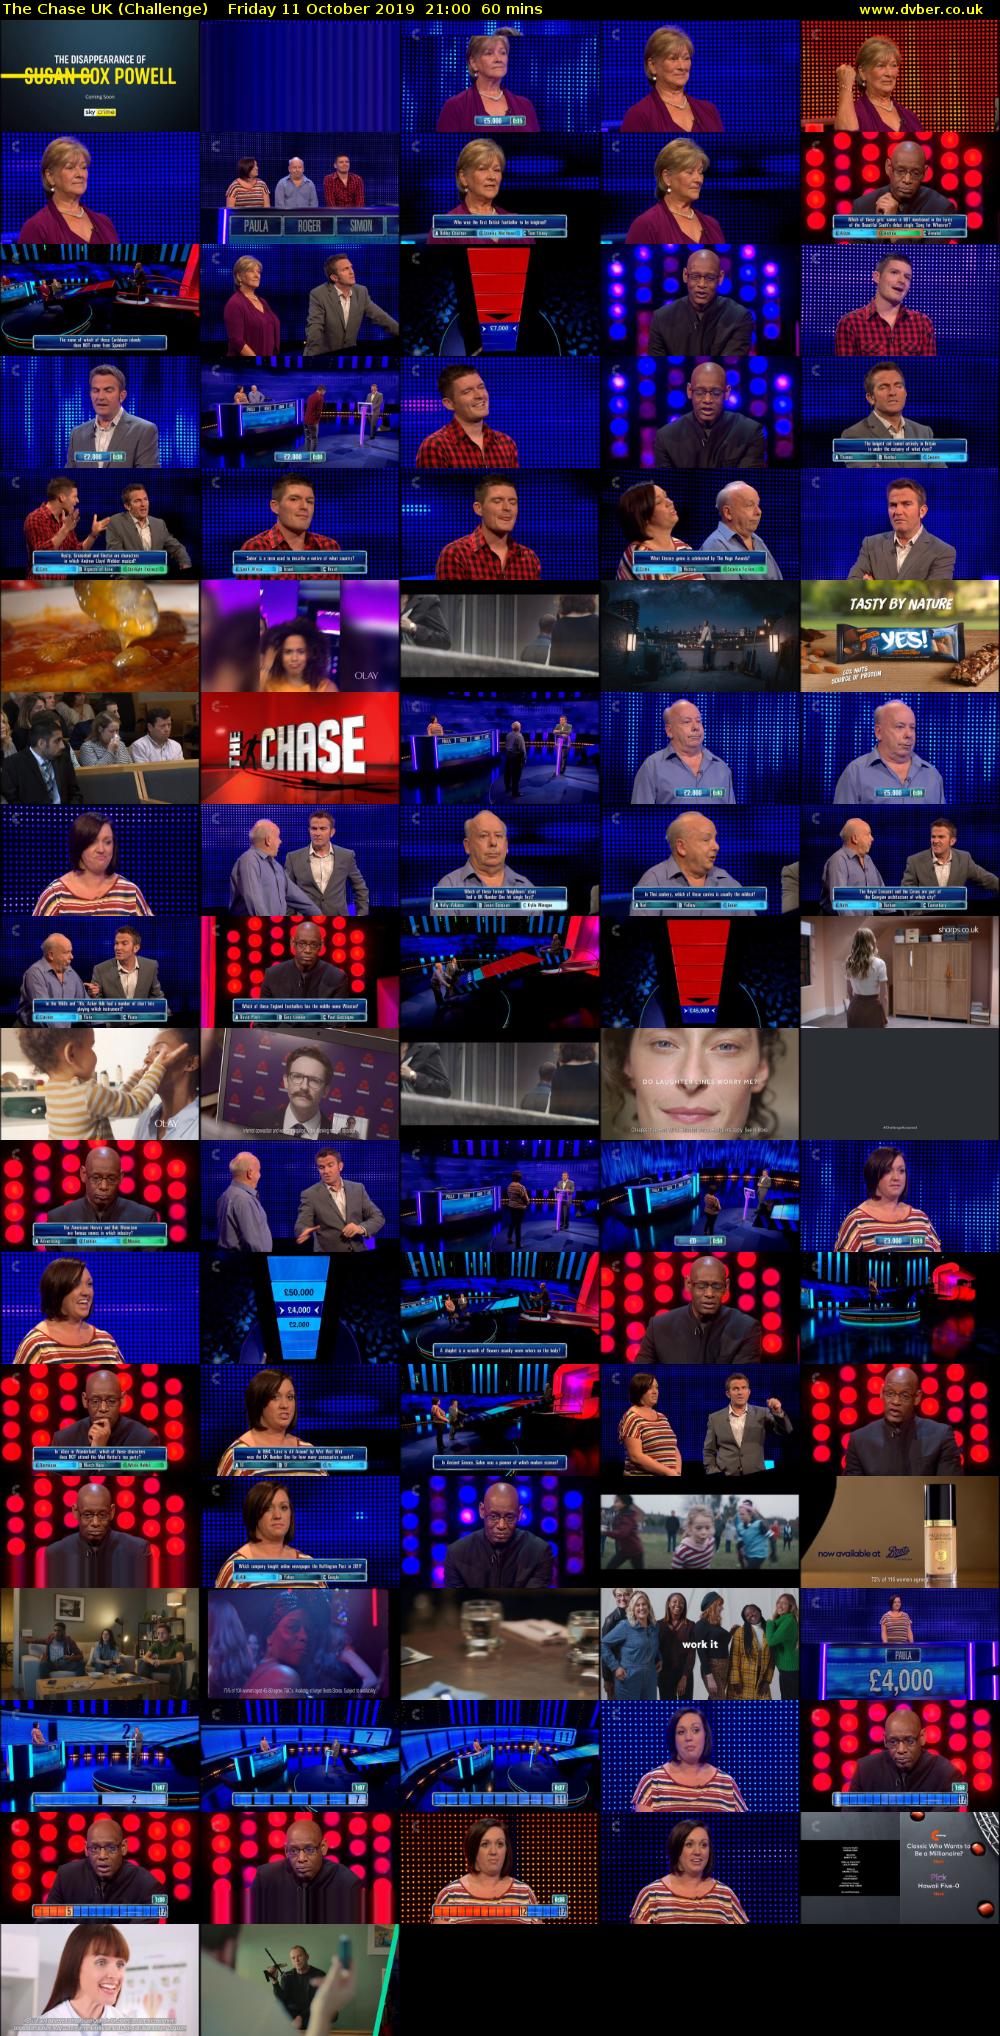 The Chase UK (Challenge) Friday 11 October 2019 21:00 - 22:00